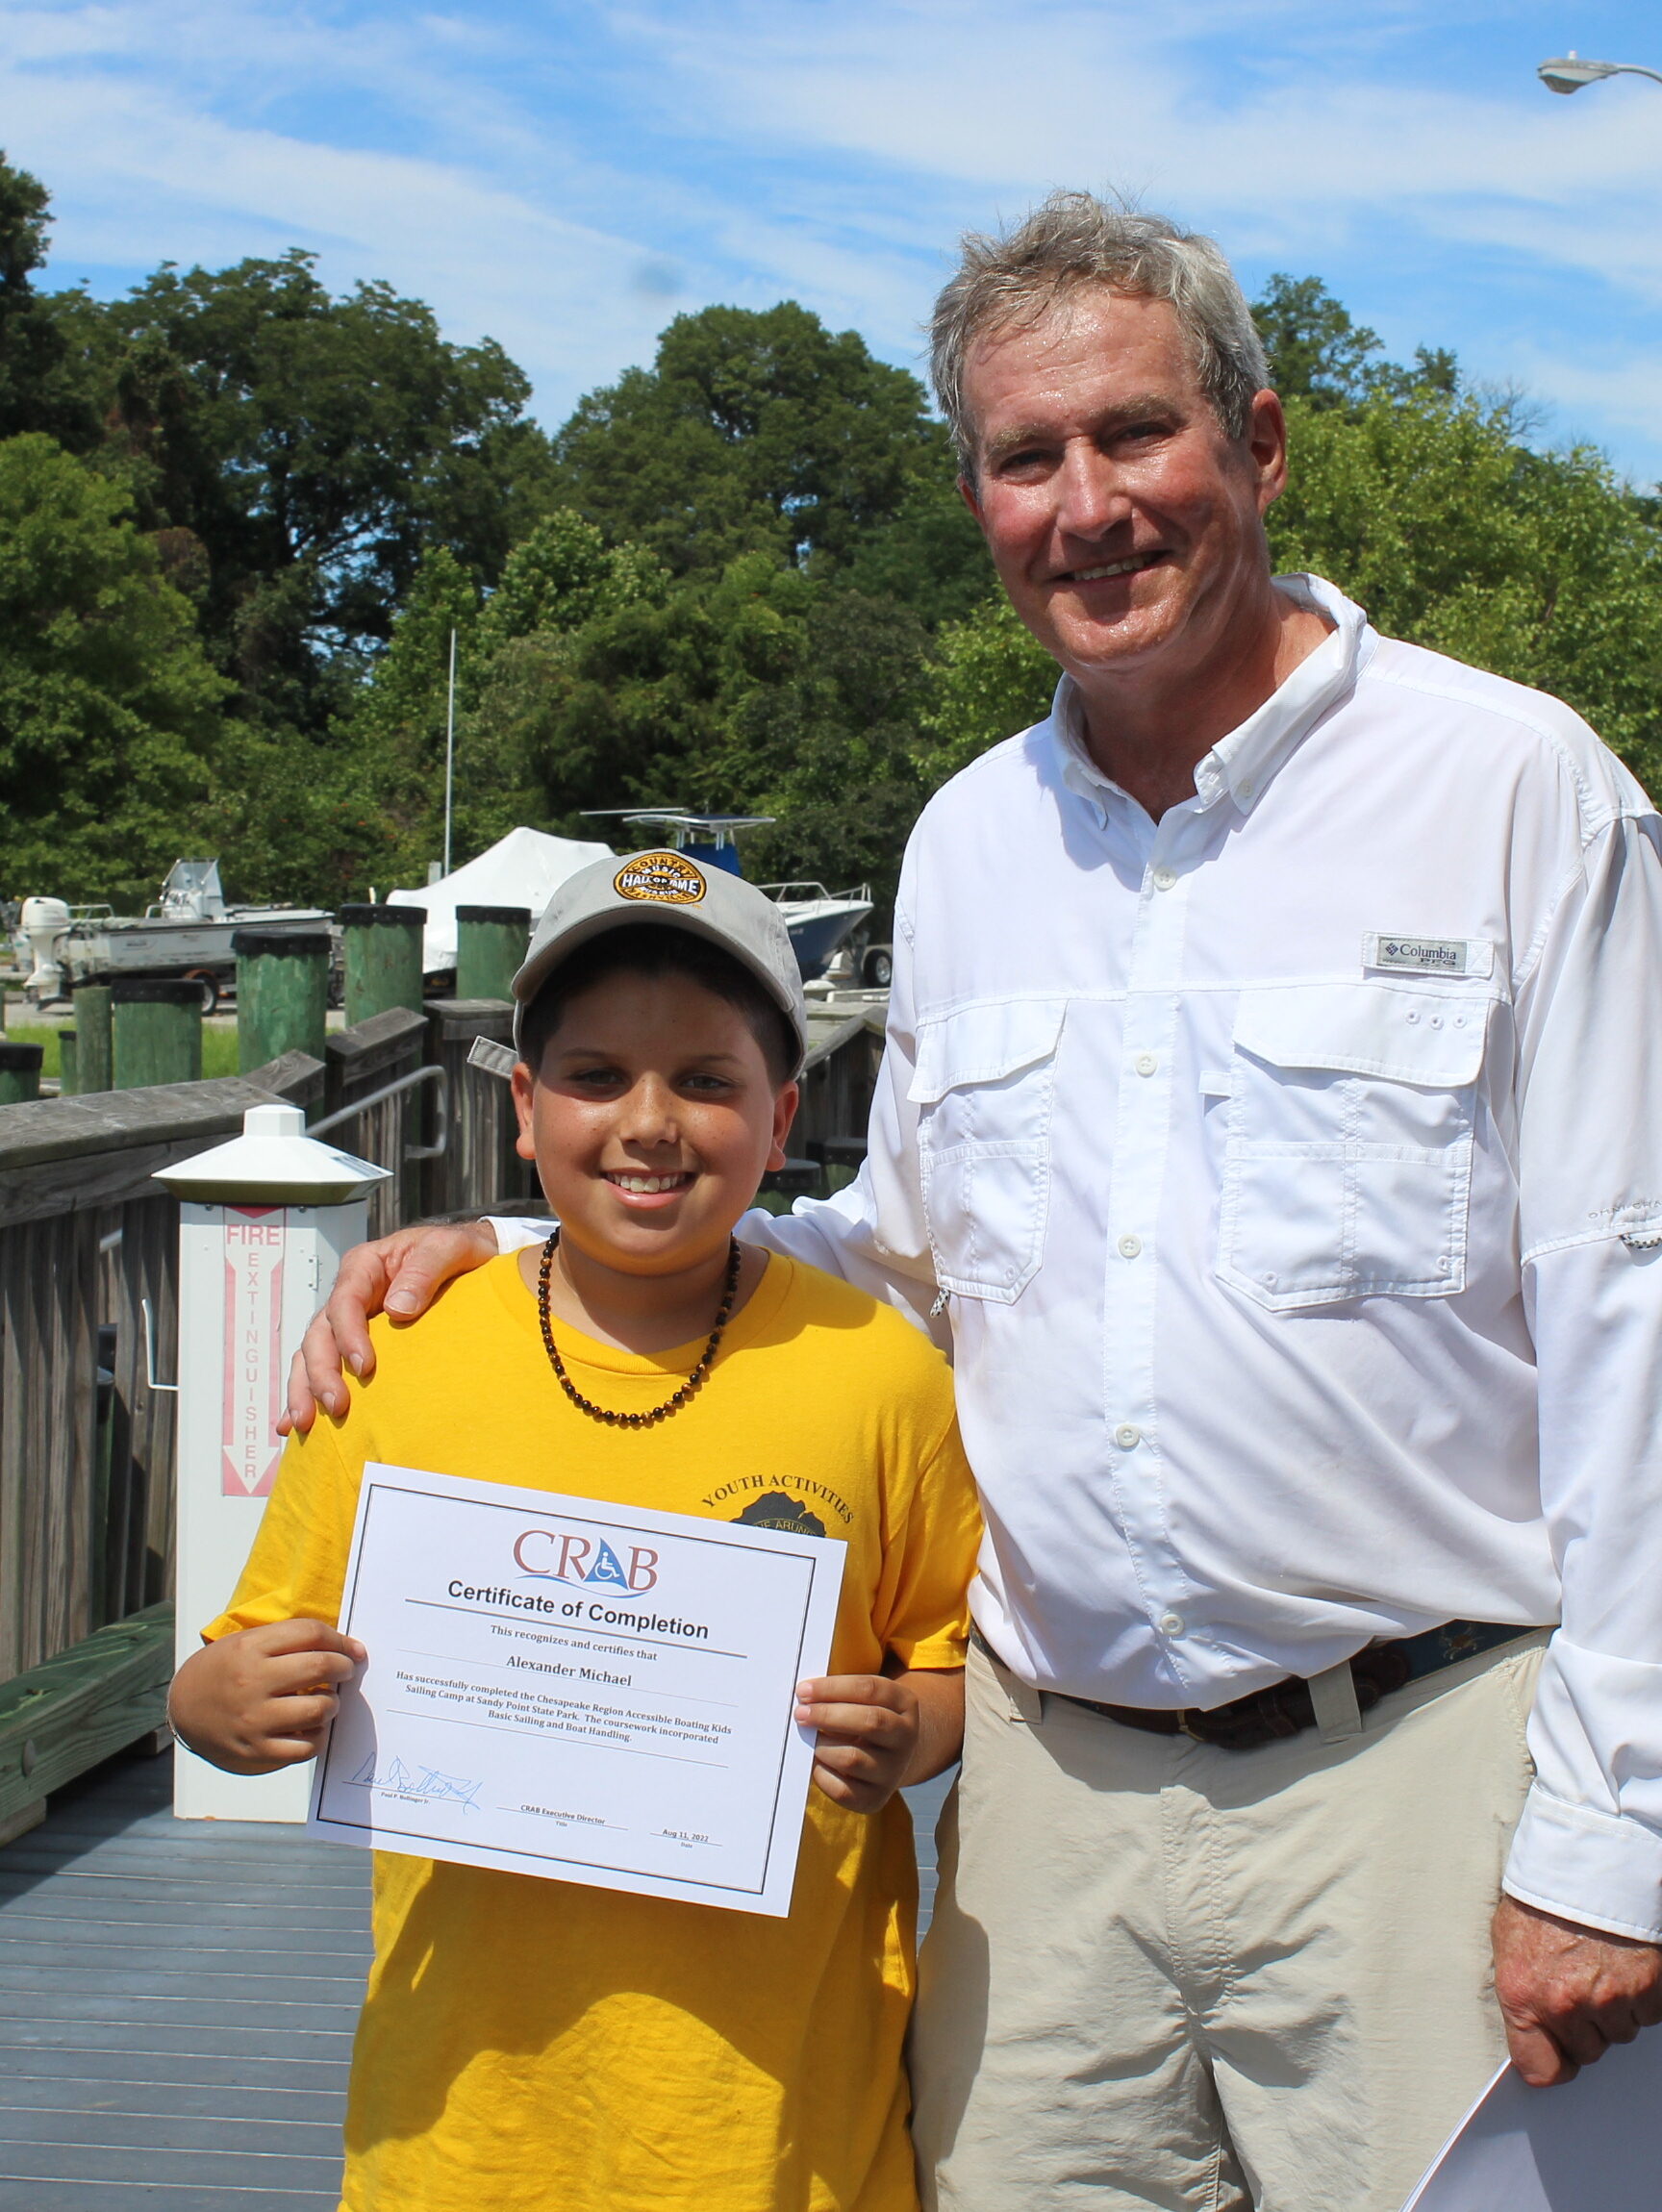 A young CRAB guest holding a CRAB certificate standing next to CRAB President and CEO, Paul Bollinger. 